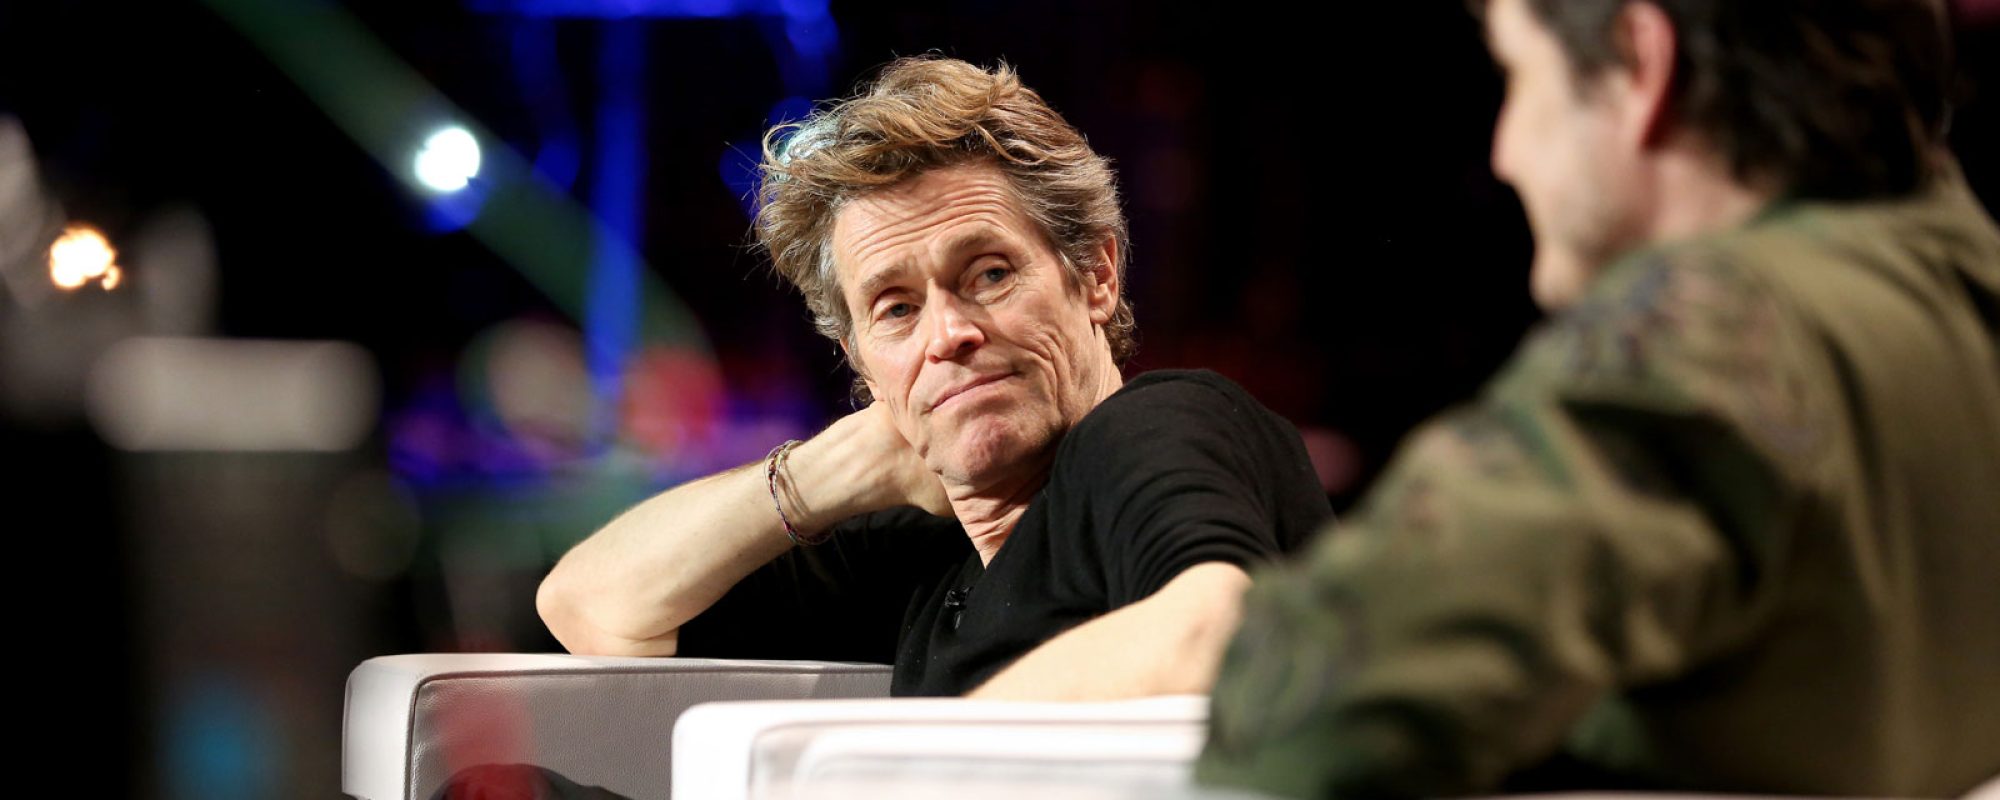 WILLEM DAFOE RETURNS TO INSIDE THE ACTORS STUDIO FOR OVATION TV WITH PEDRO PASCAL AS HOST